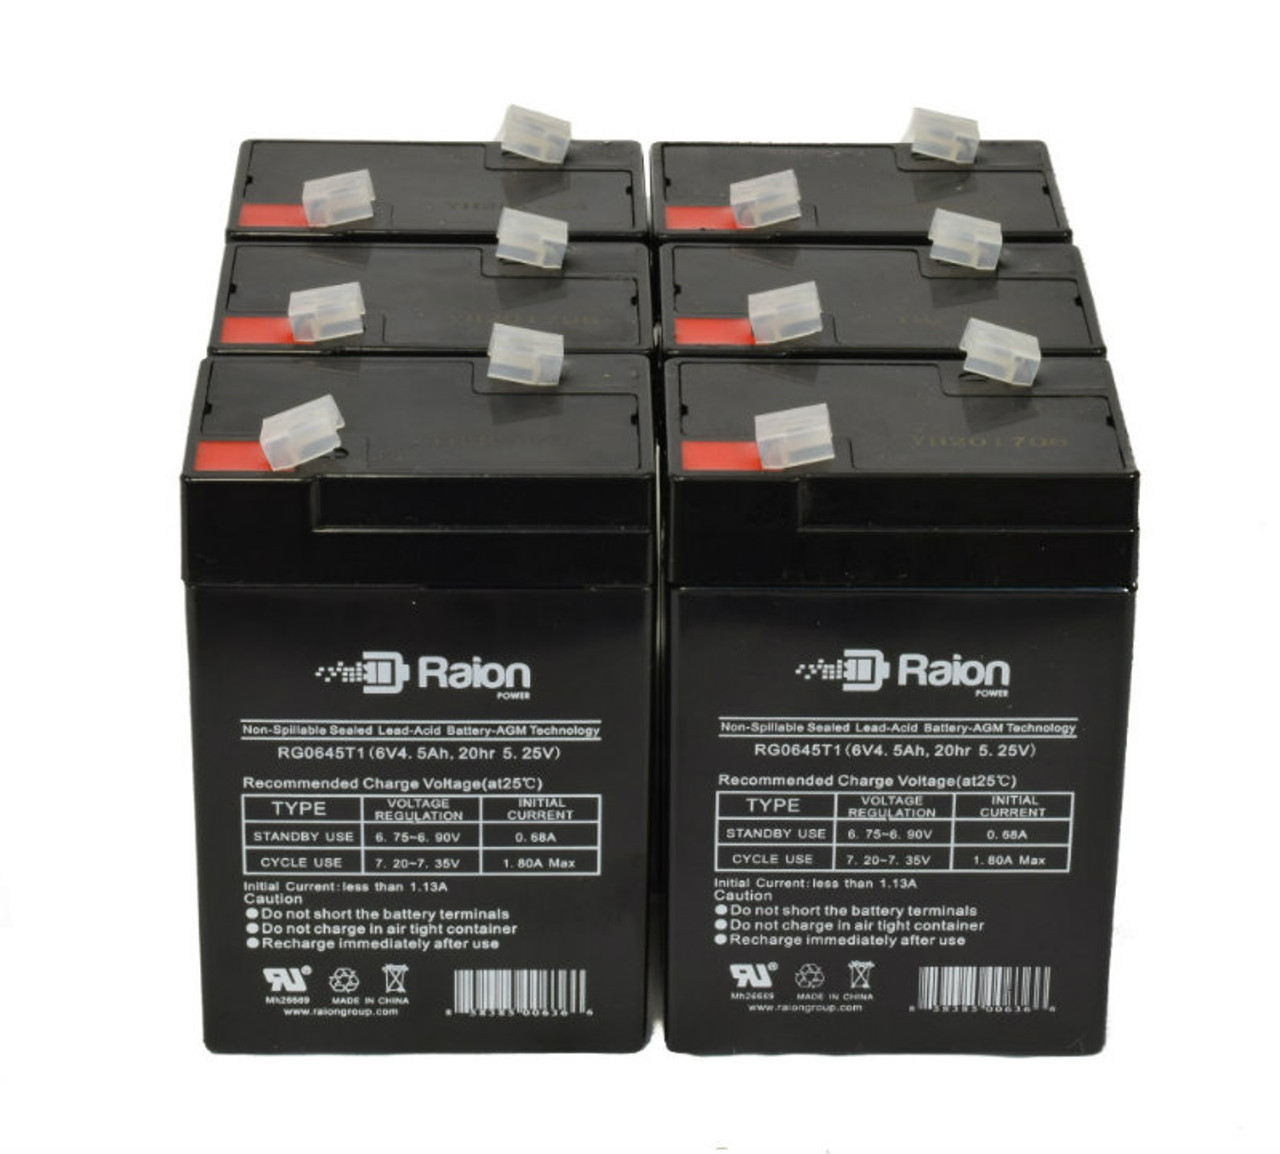 Raion Power 6 Volt 4.5Ah RG0645T1 Replacement Battery for Sheng Yang SY640 - 6 Pack